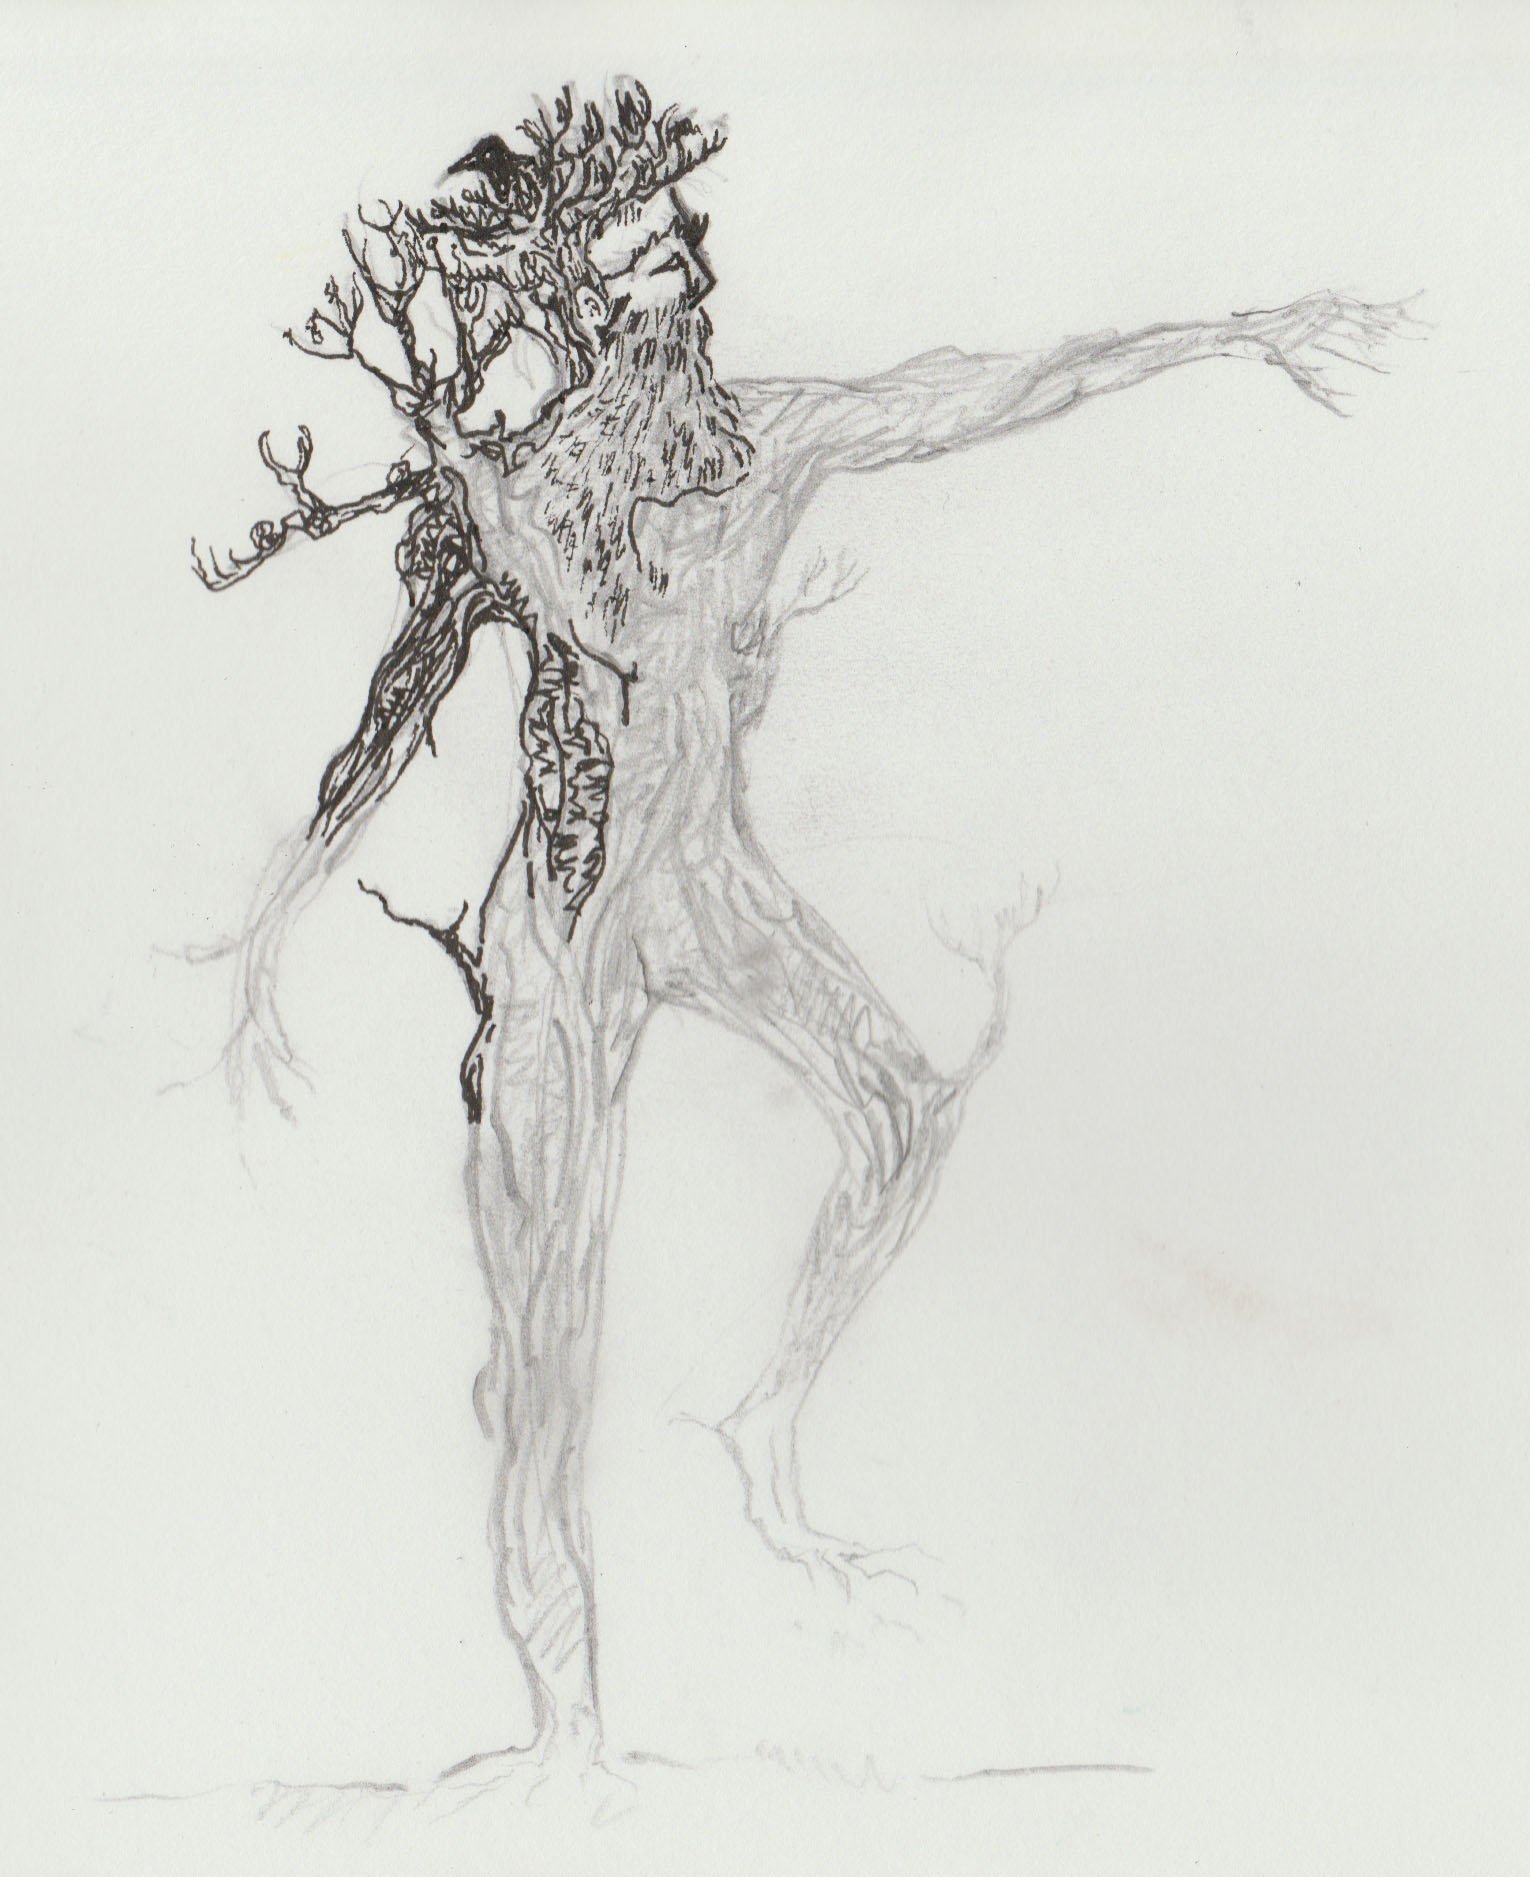 Initial sketch ideas: a 'wildman of the woods'